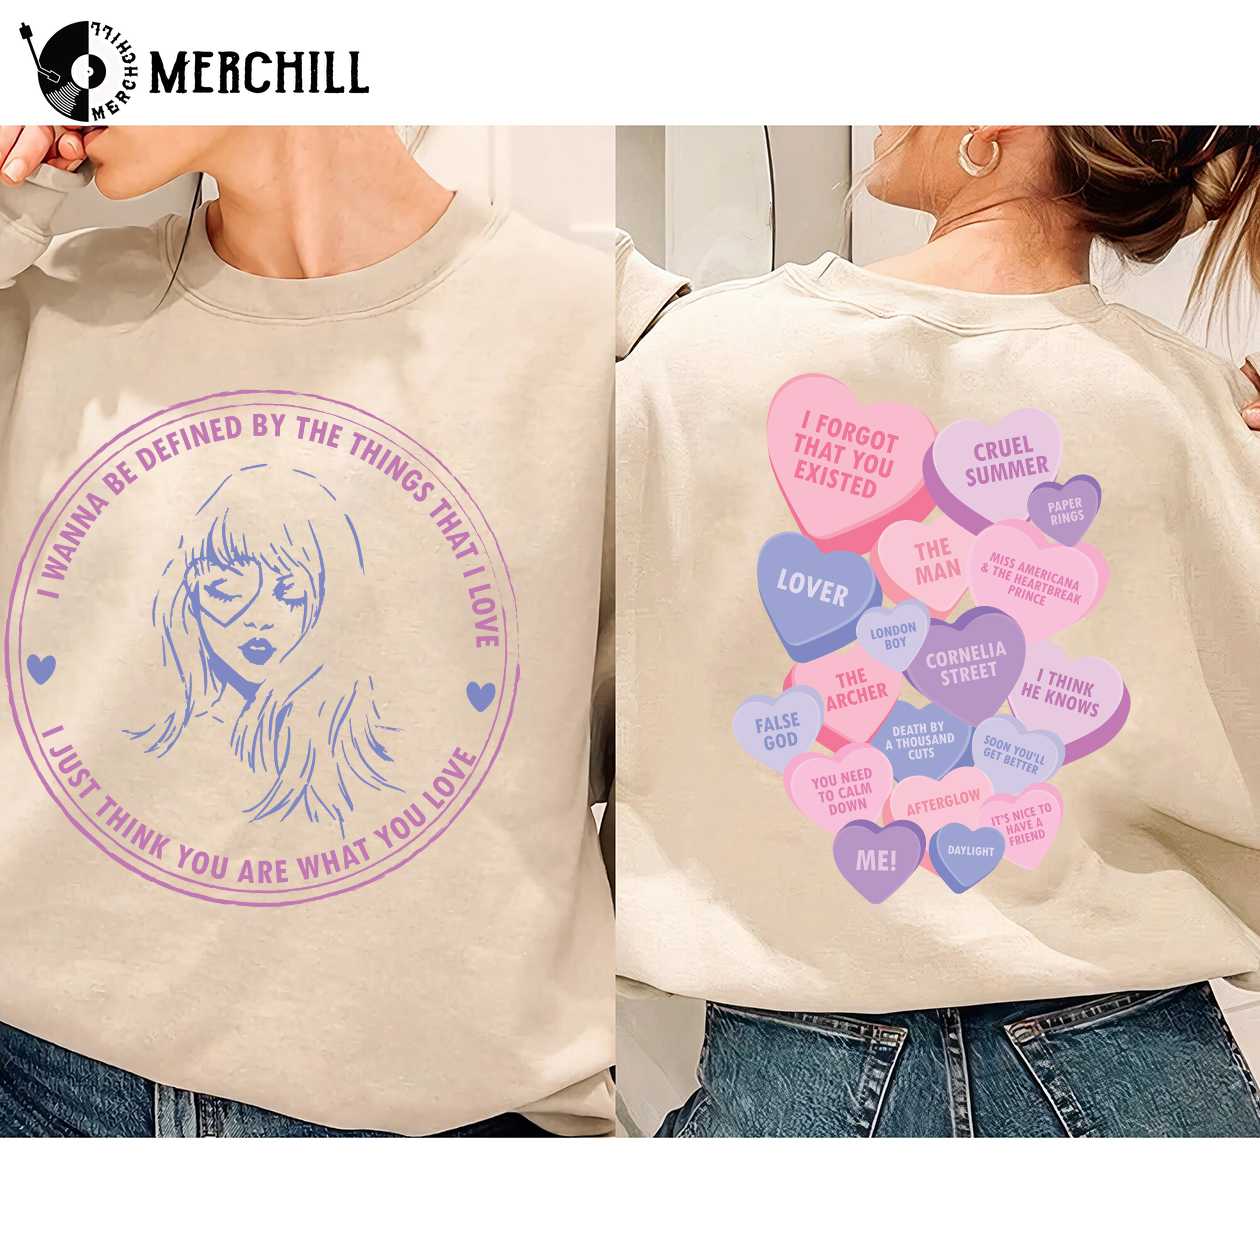 Swiftie Taylors Version Embroidery, Gifts For Taylor Swift Fans